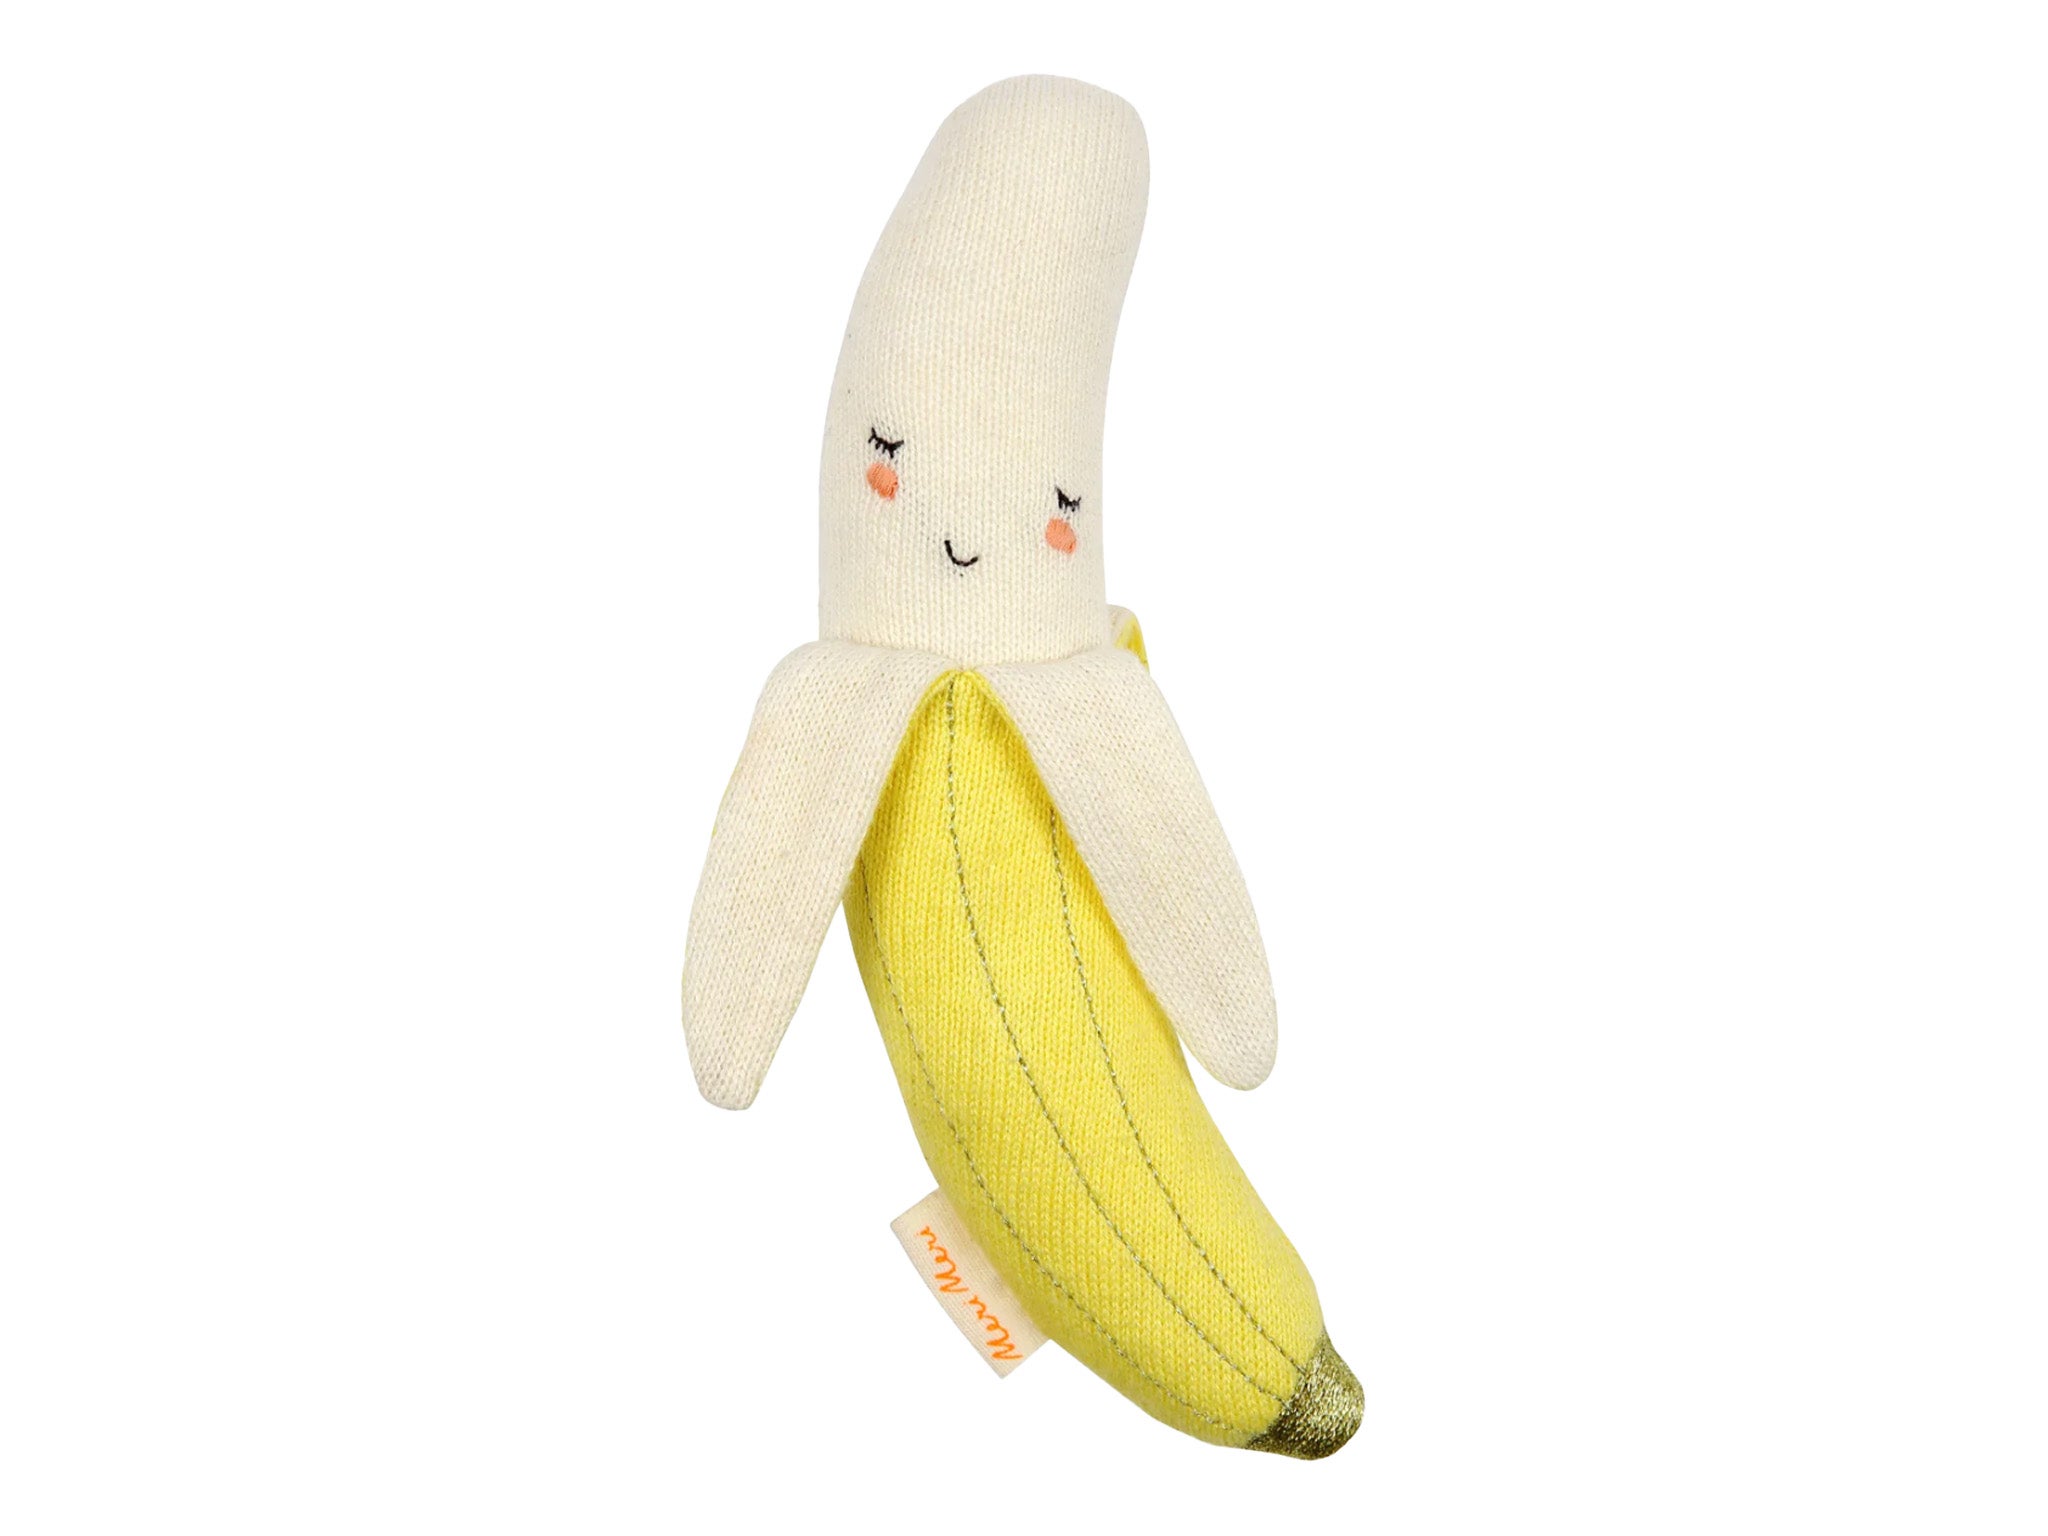 banana-Indybest-baby-gift-review.jpg